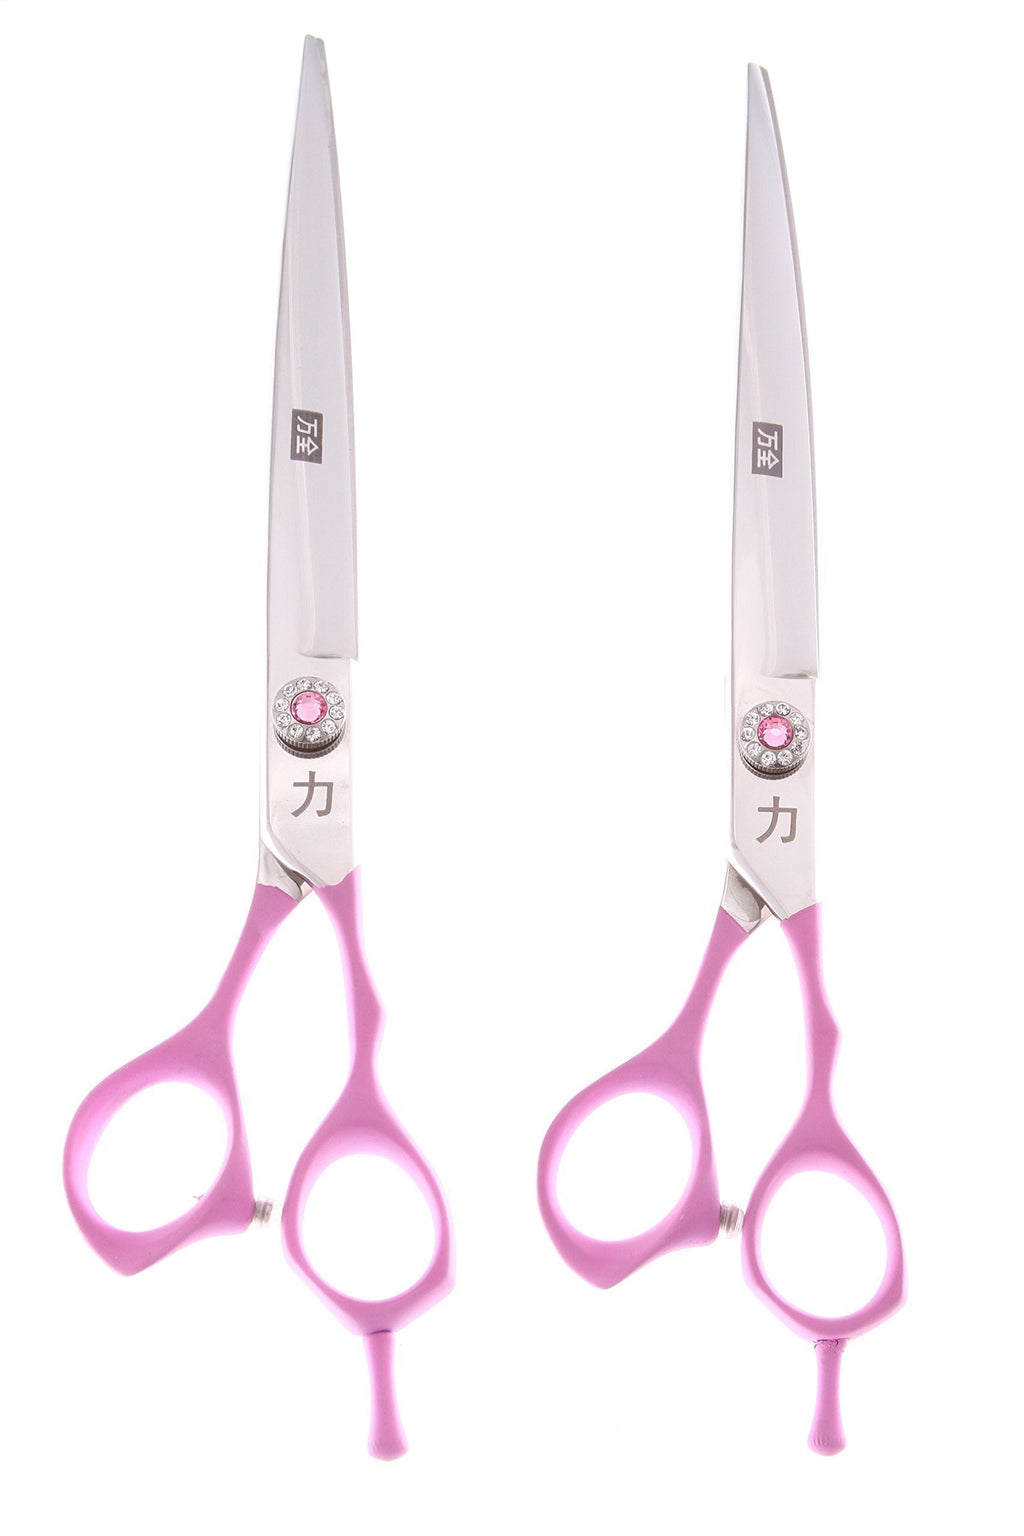 [Australia] - ShearsDirect Set of Japanese 440C Straight and Curved with Pink Rubber Handle, 8.0", Stainless Steel 